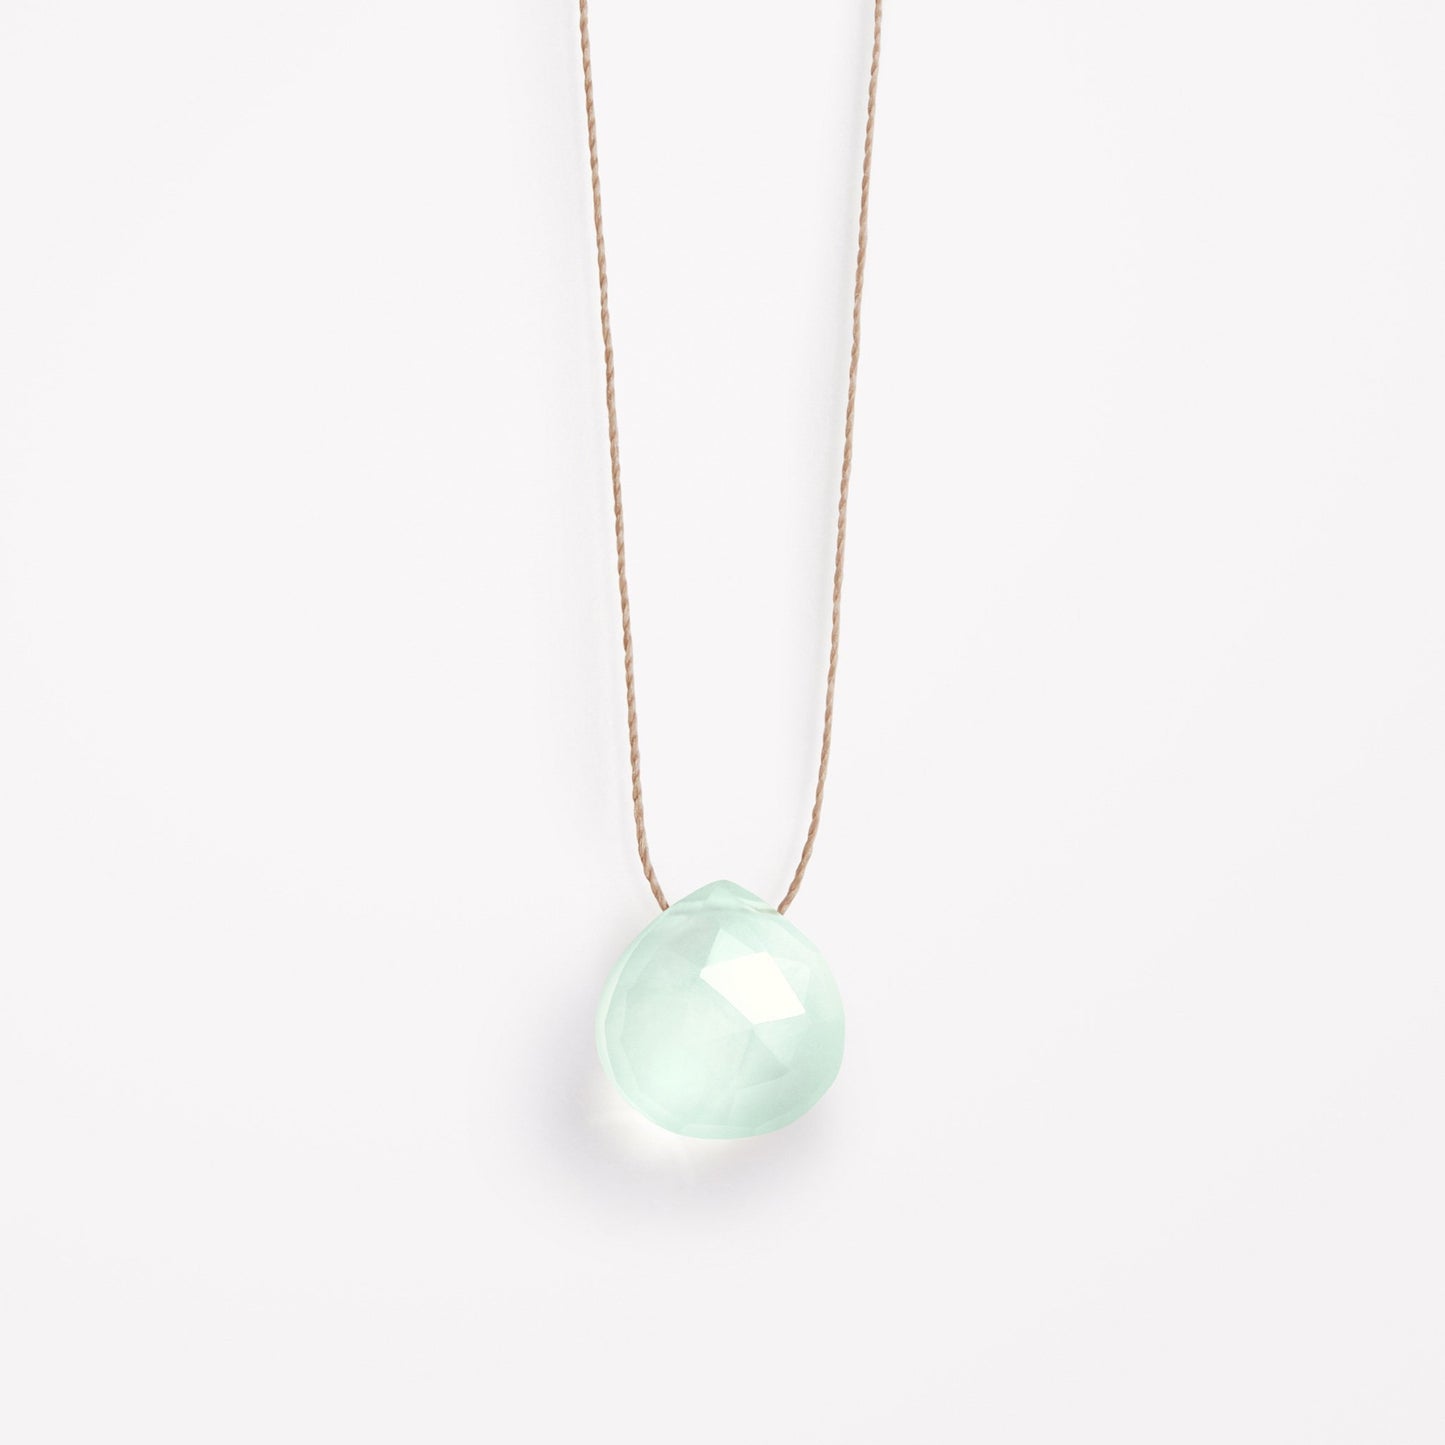 Wanderlust Life Fine Cord Necklace - Chalcedony - Seaglass Wanderlust Life The White Room